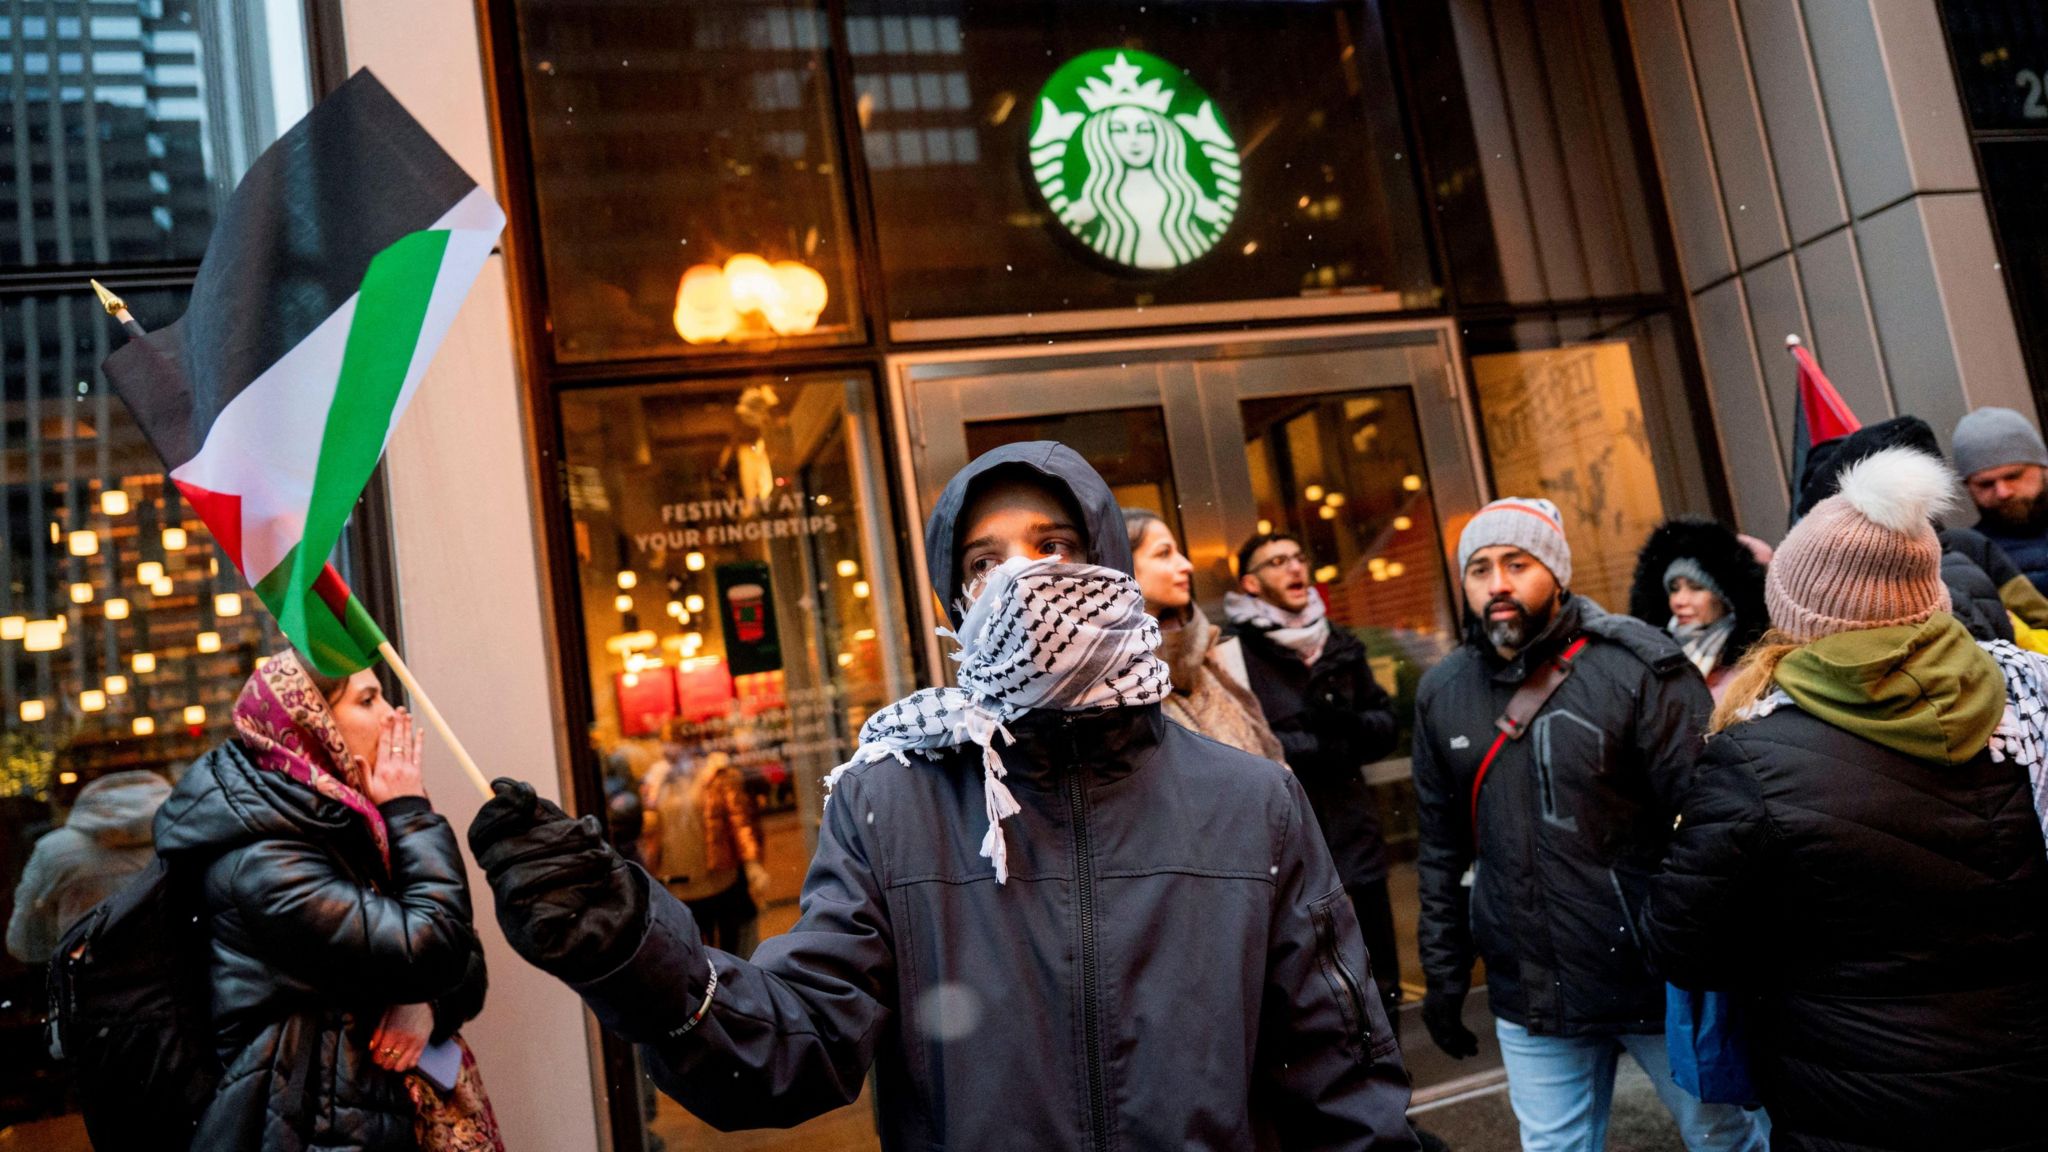 Activists of the group Chicago Youth Liberation for Palestine protest outside a Starbucks in Chicago holding Palestinian flags